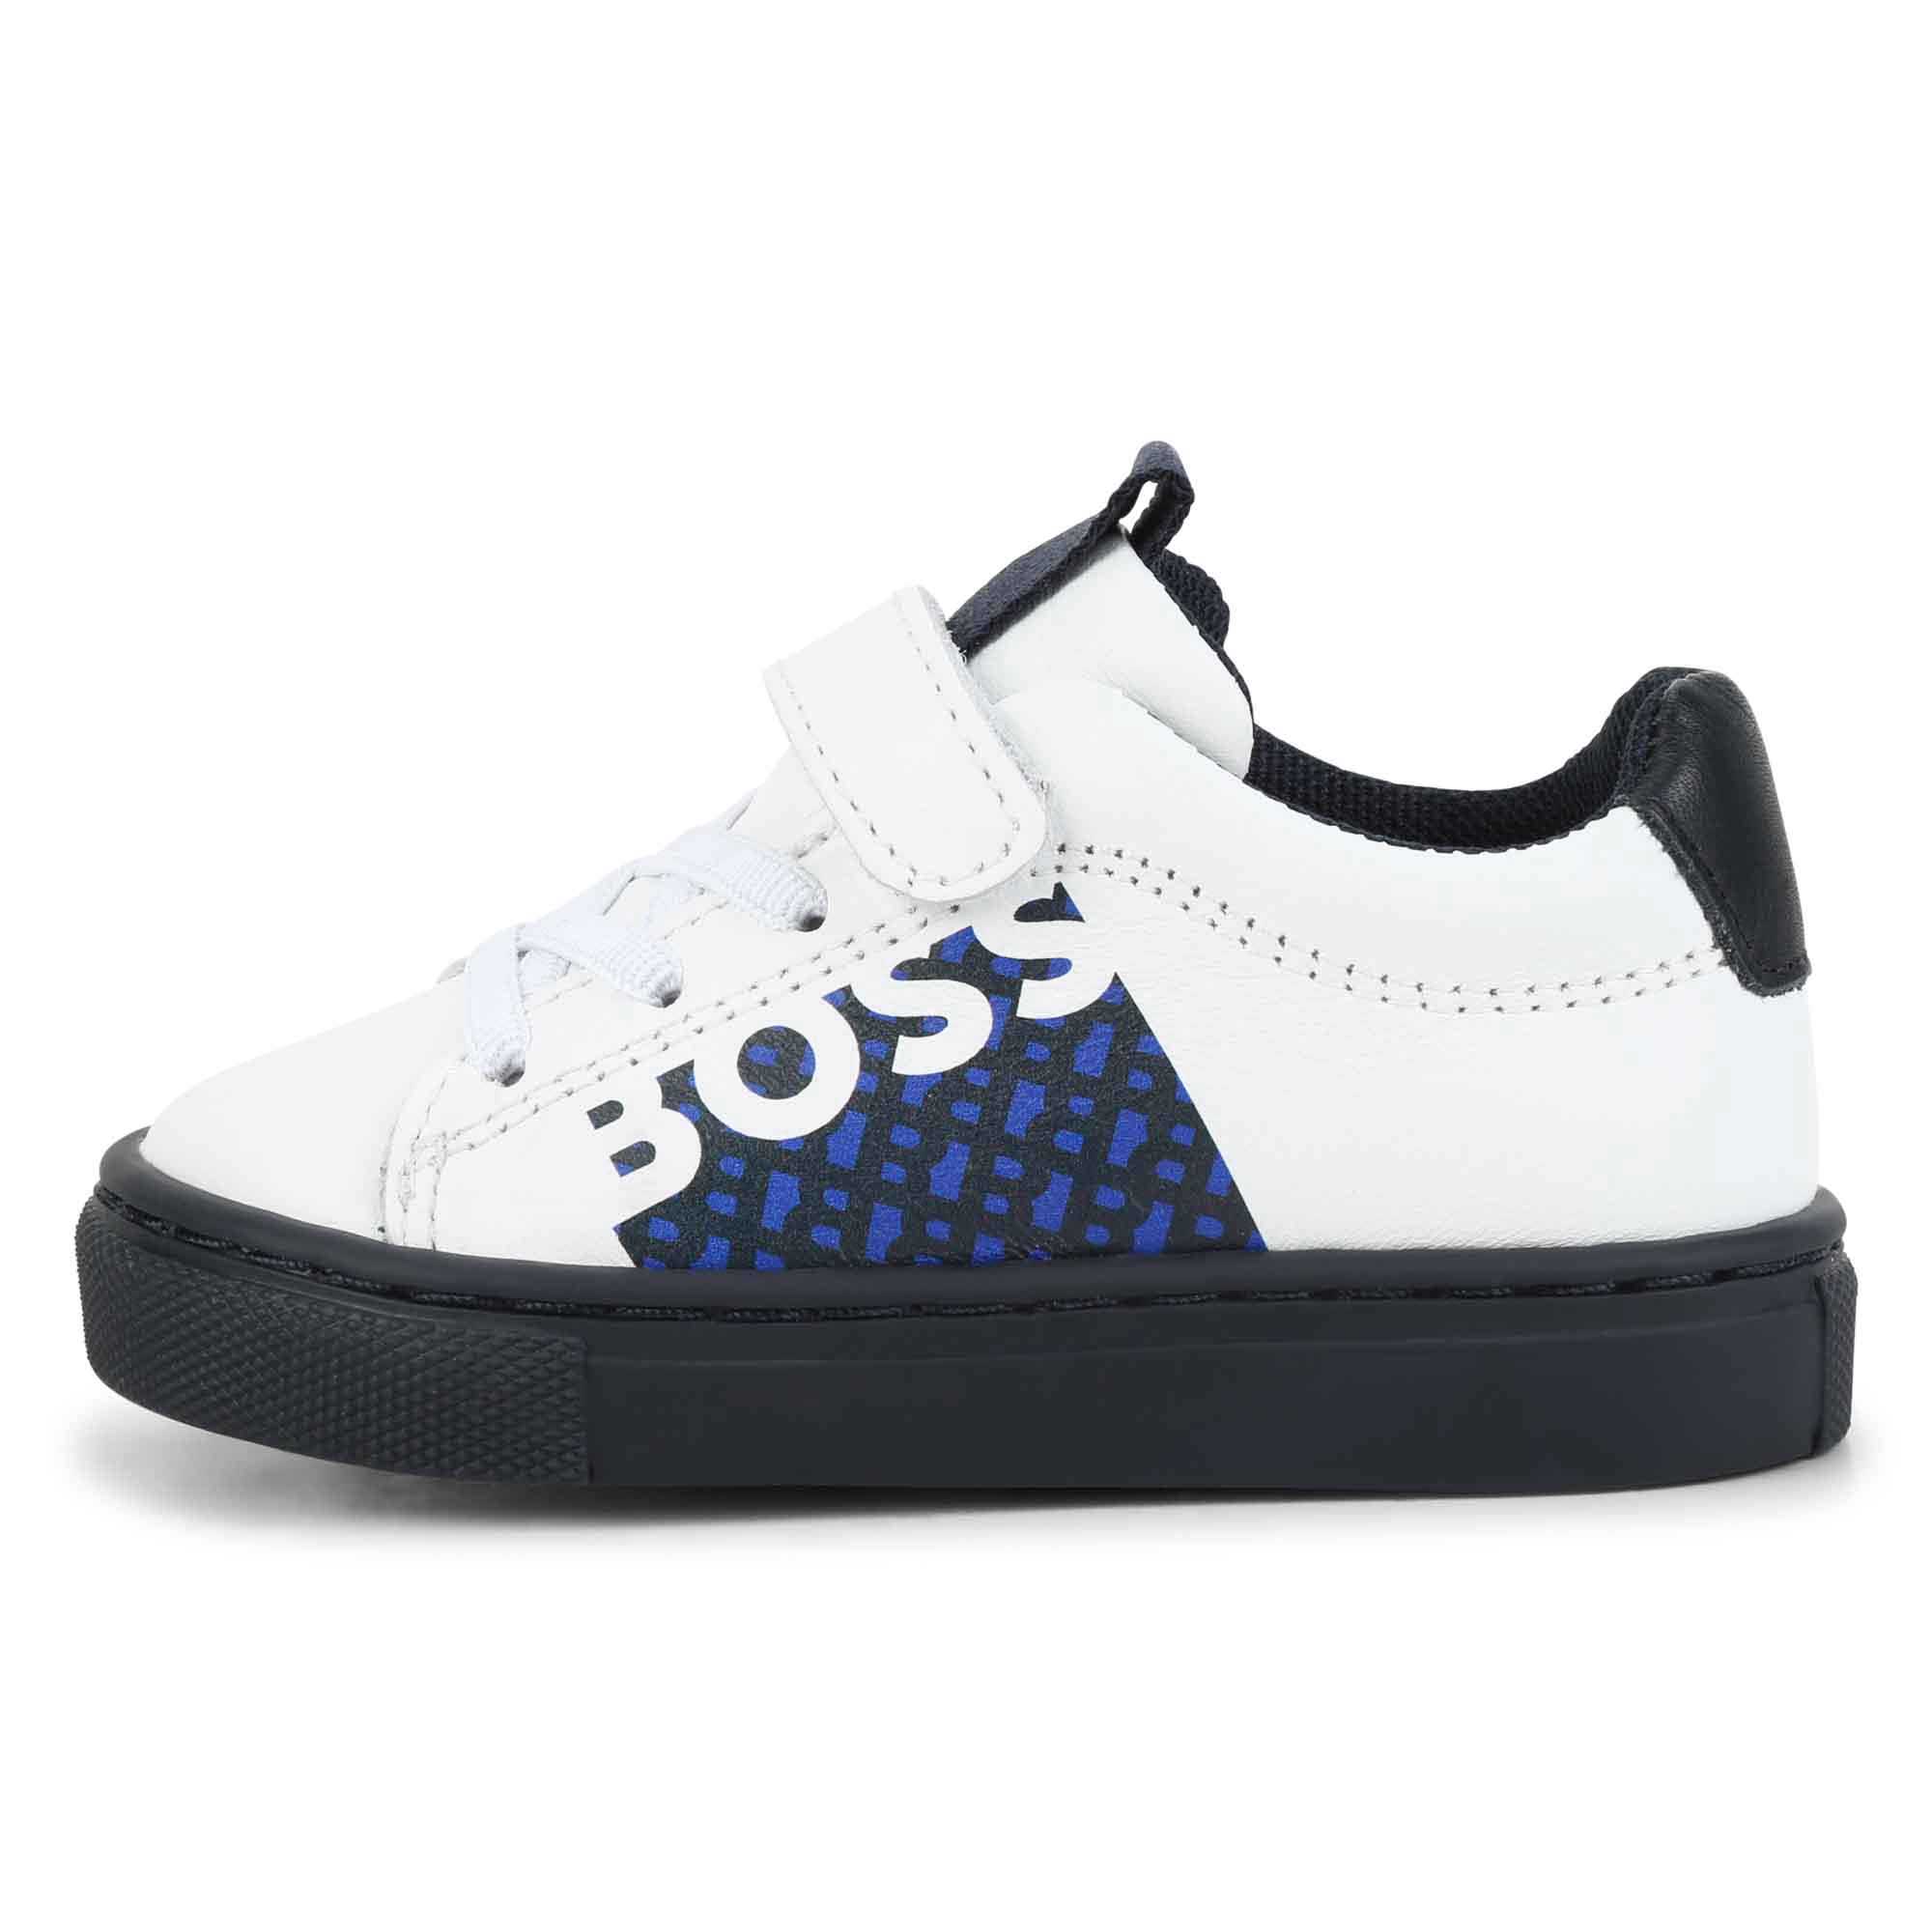 Leather trainers BOSS for BOY